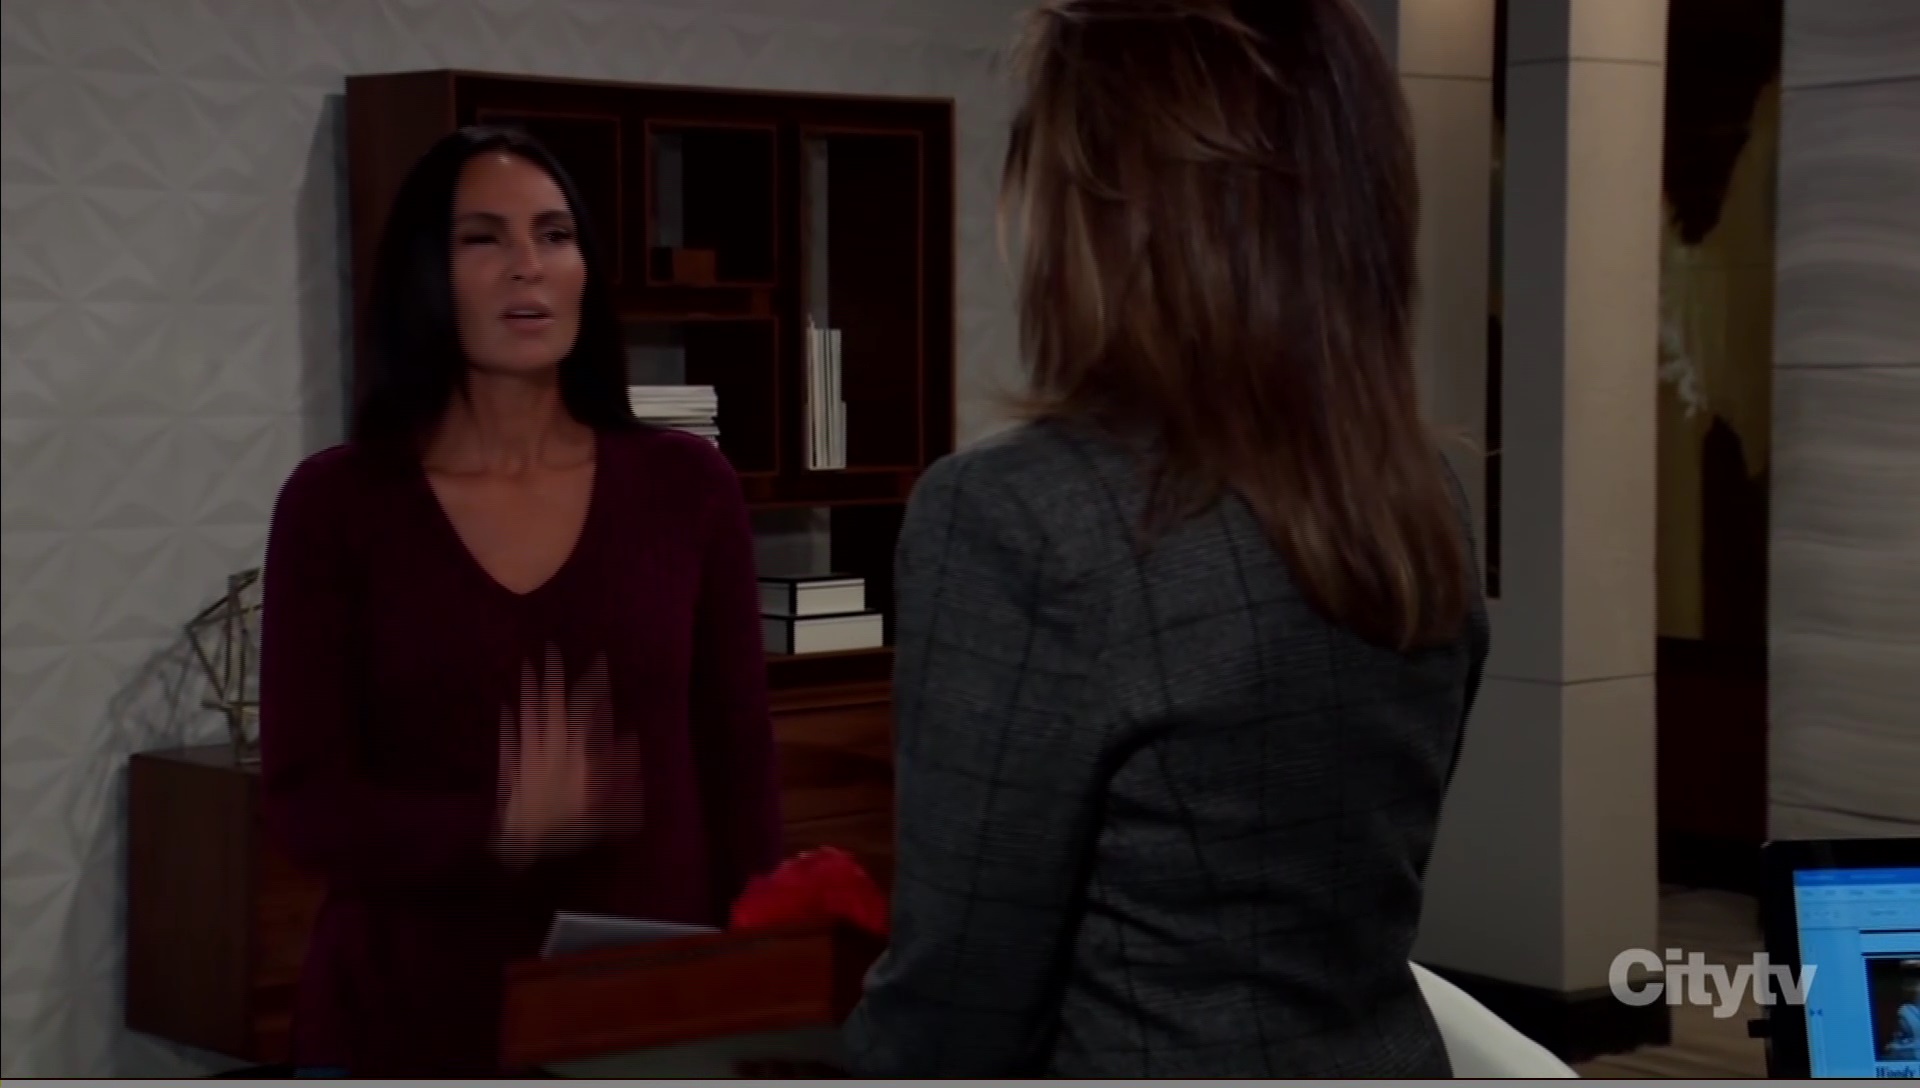 harmony alexis stop being friends general hospital abc soapsspoilers